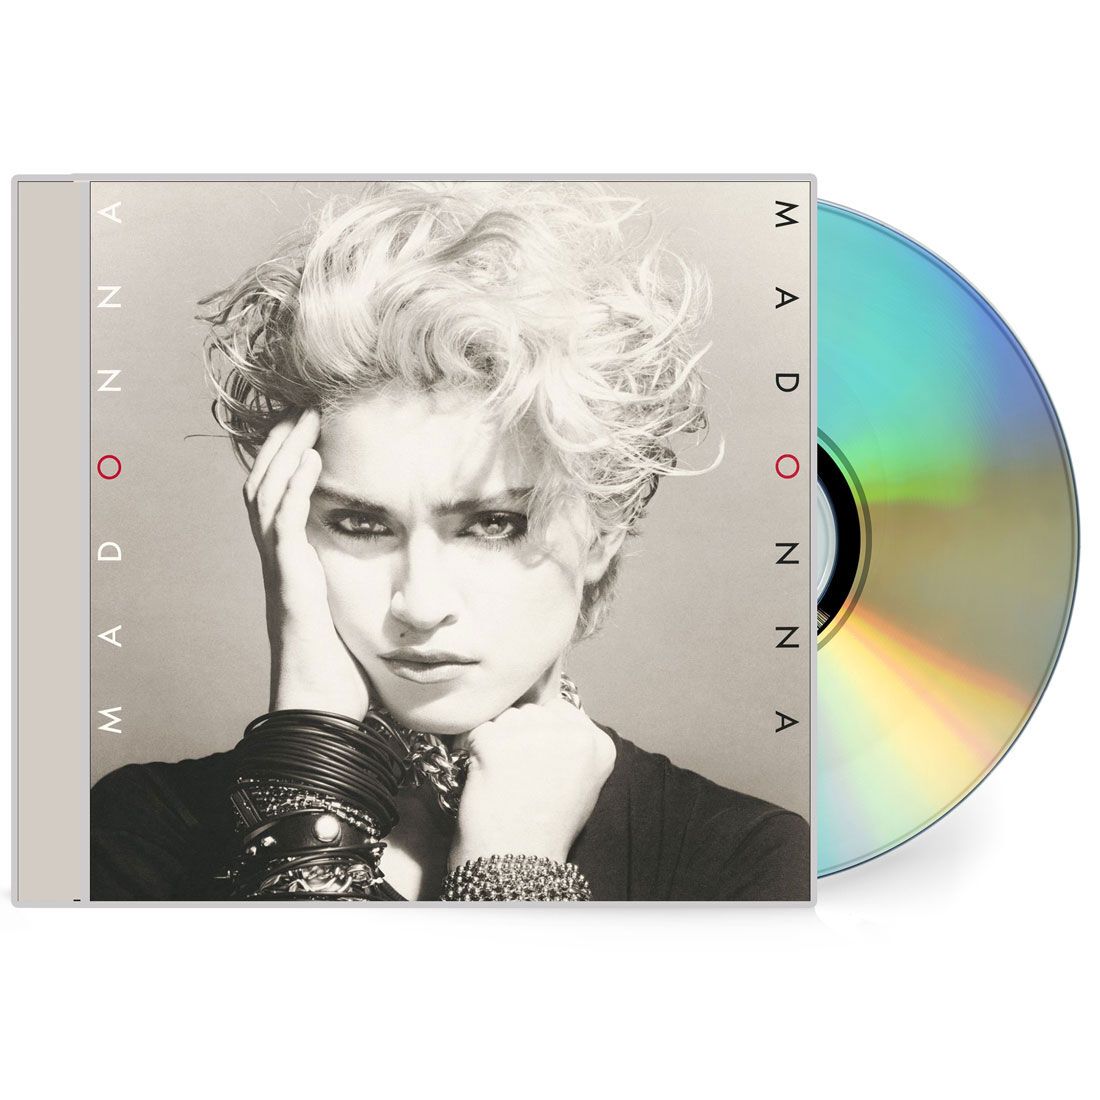 Buy Madonna Vinyl and CDs | Dig! Store